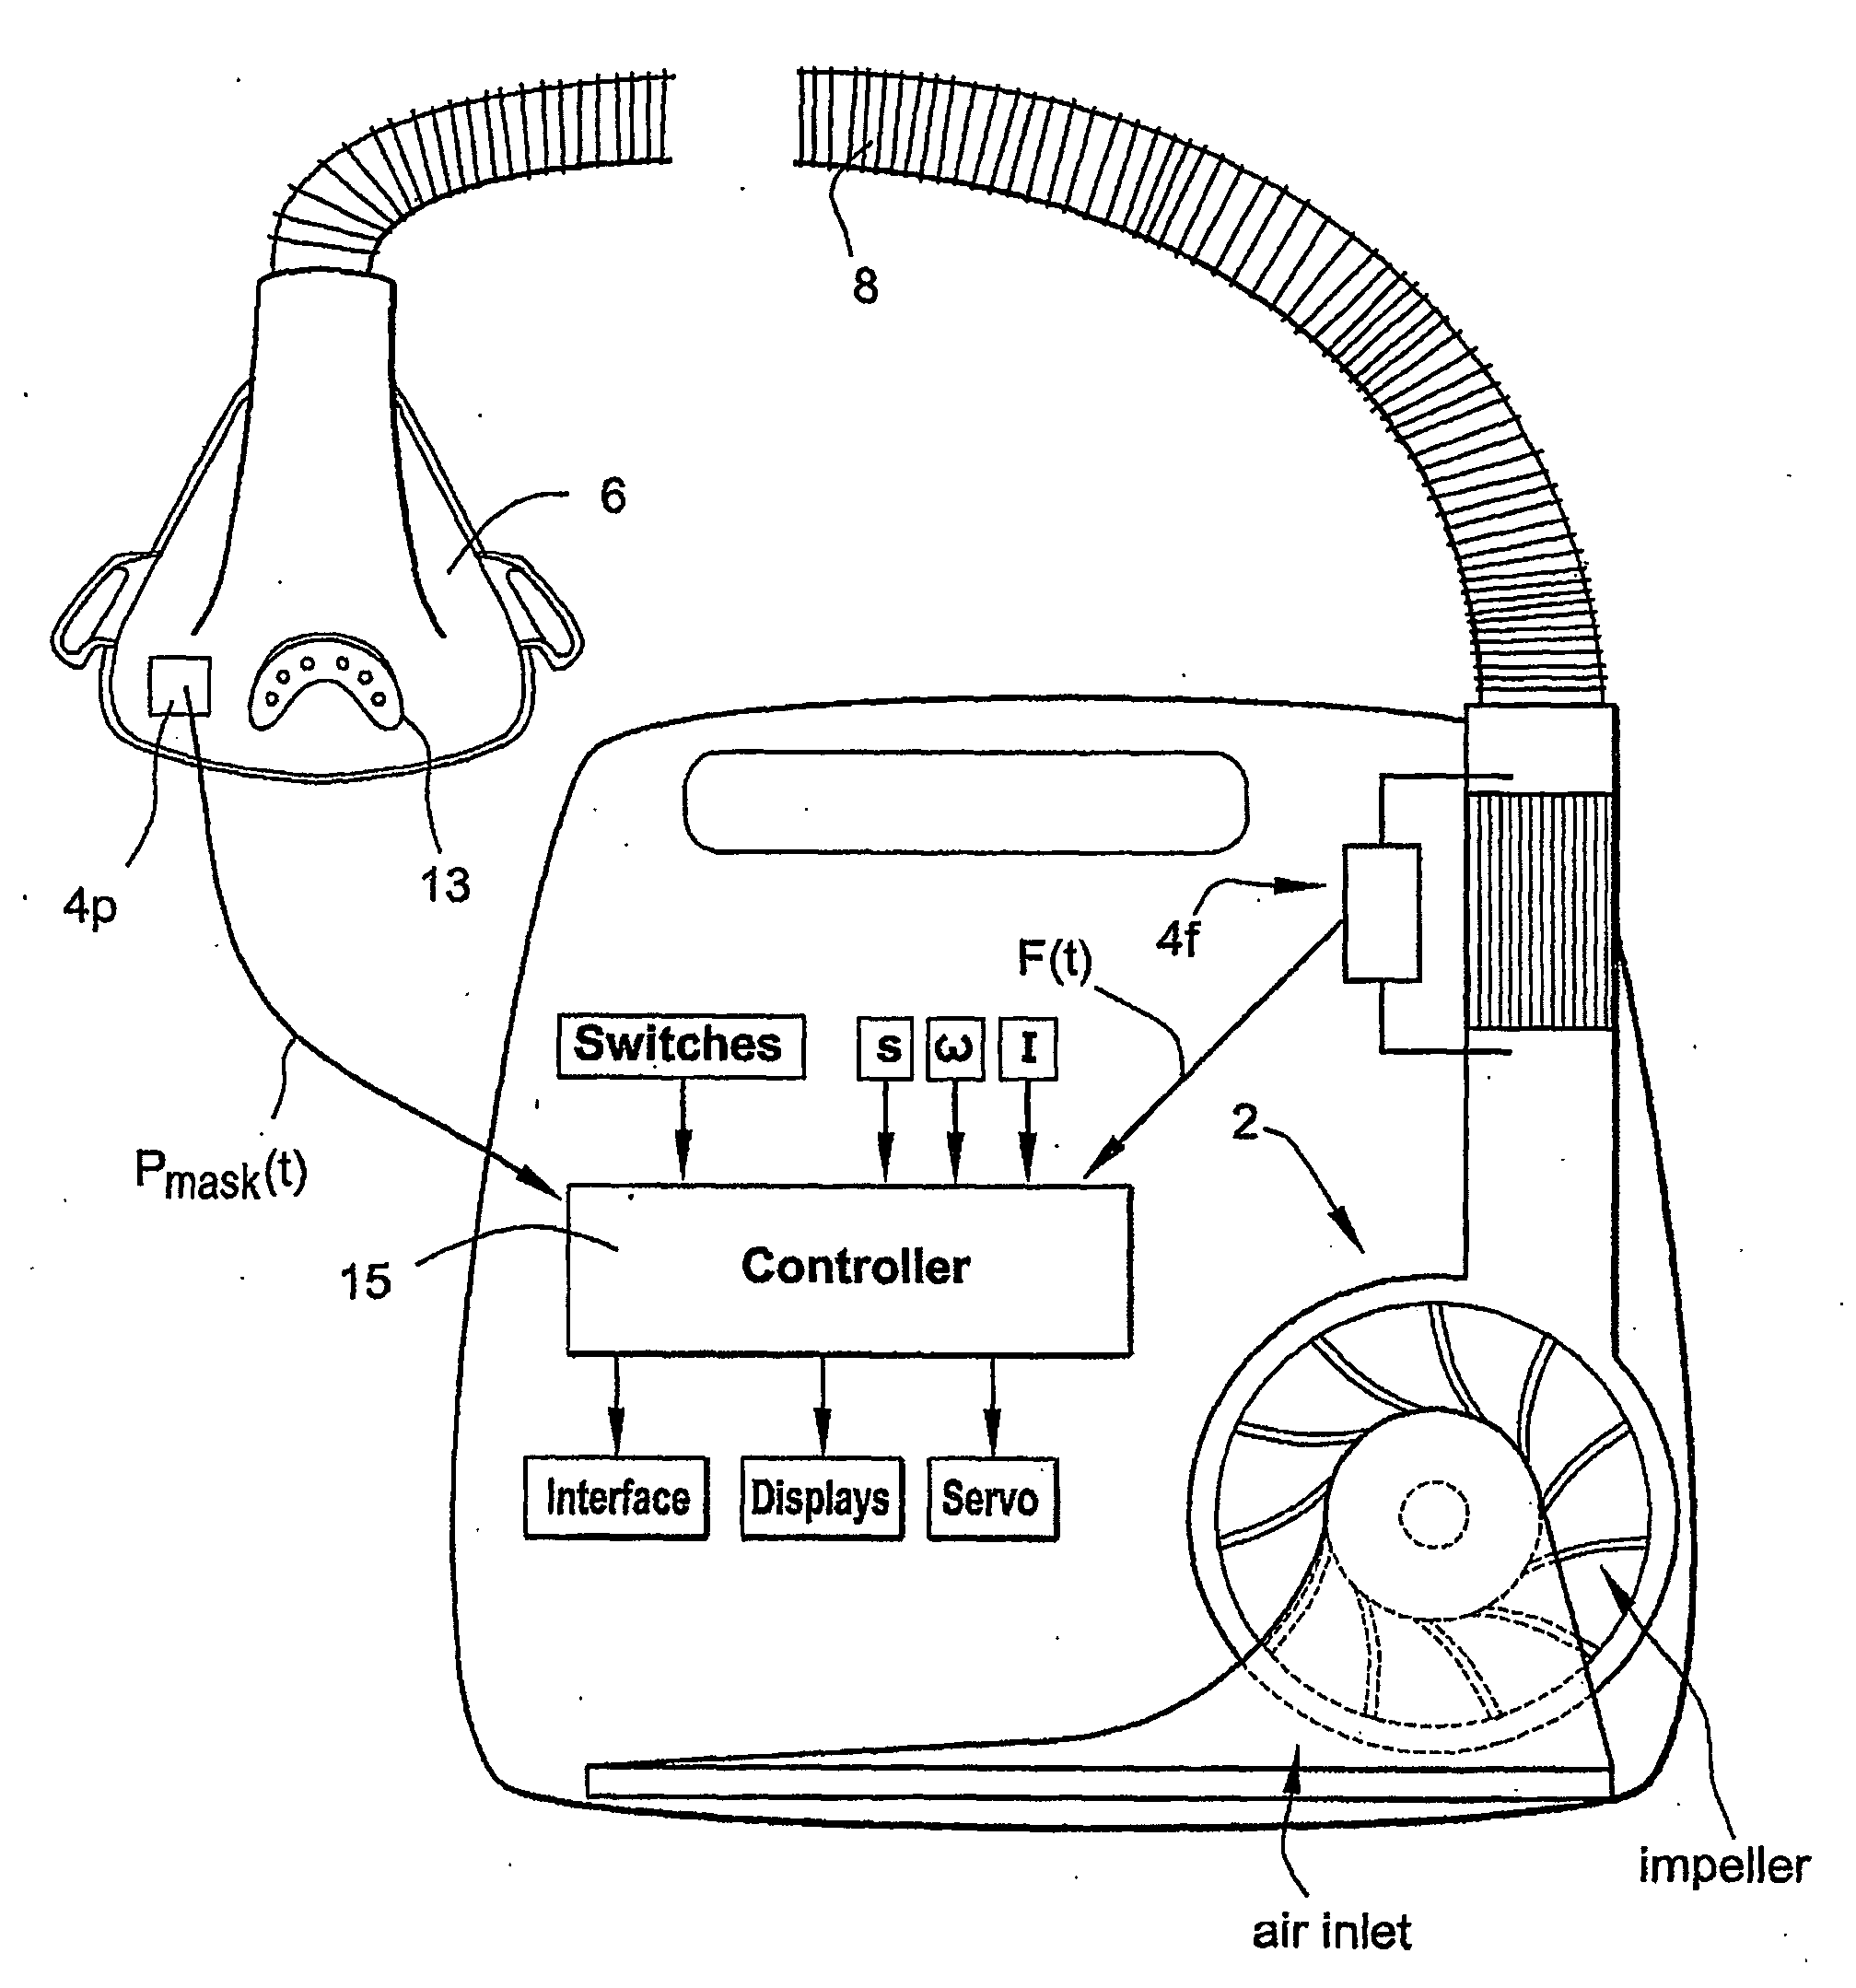 Method and apparatus for improving cpap patient compliance